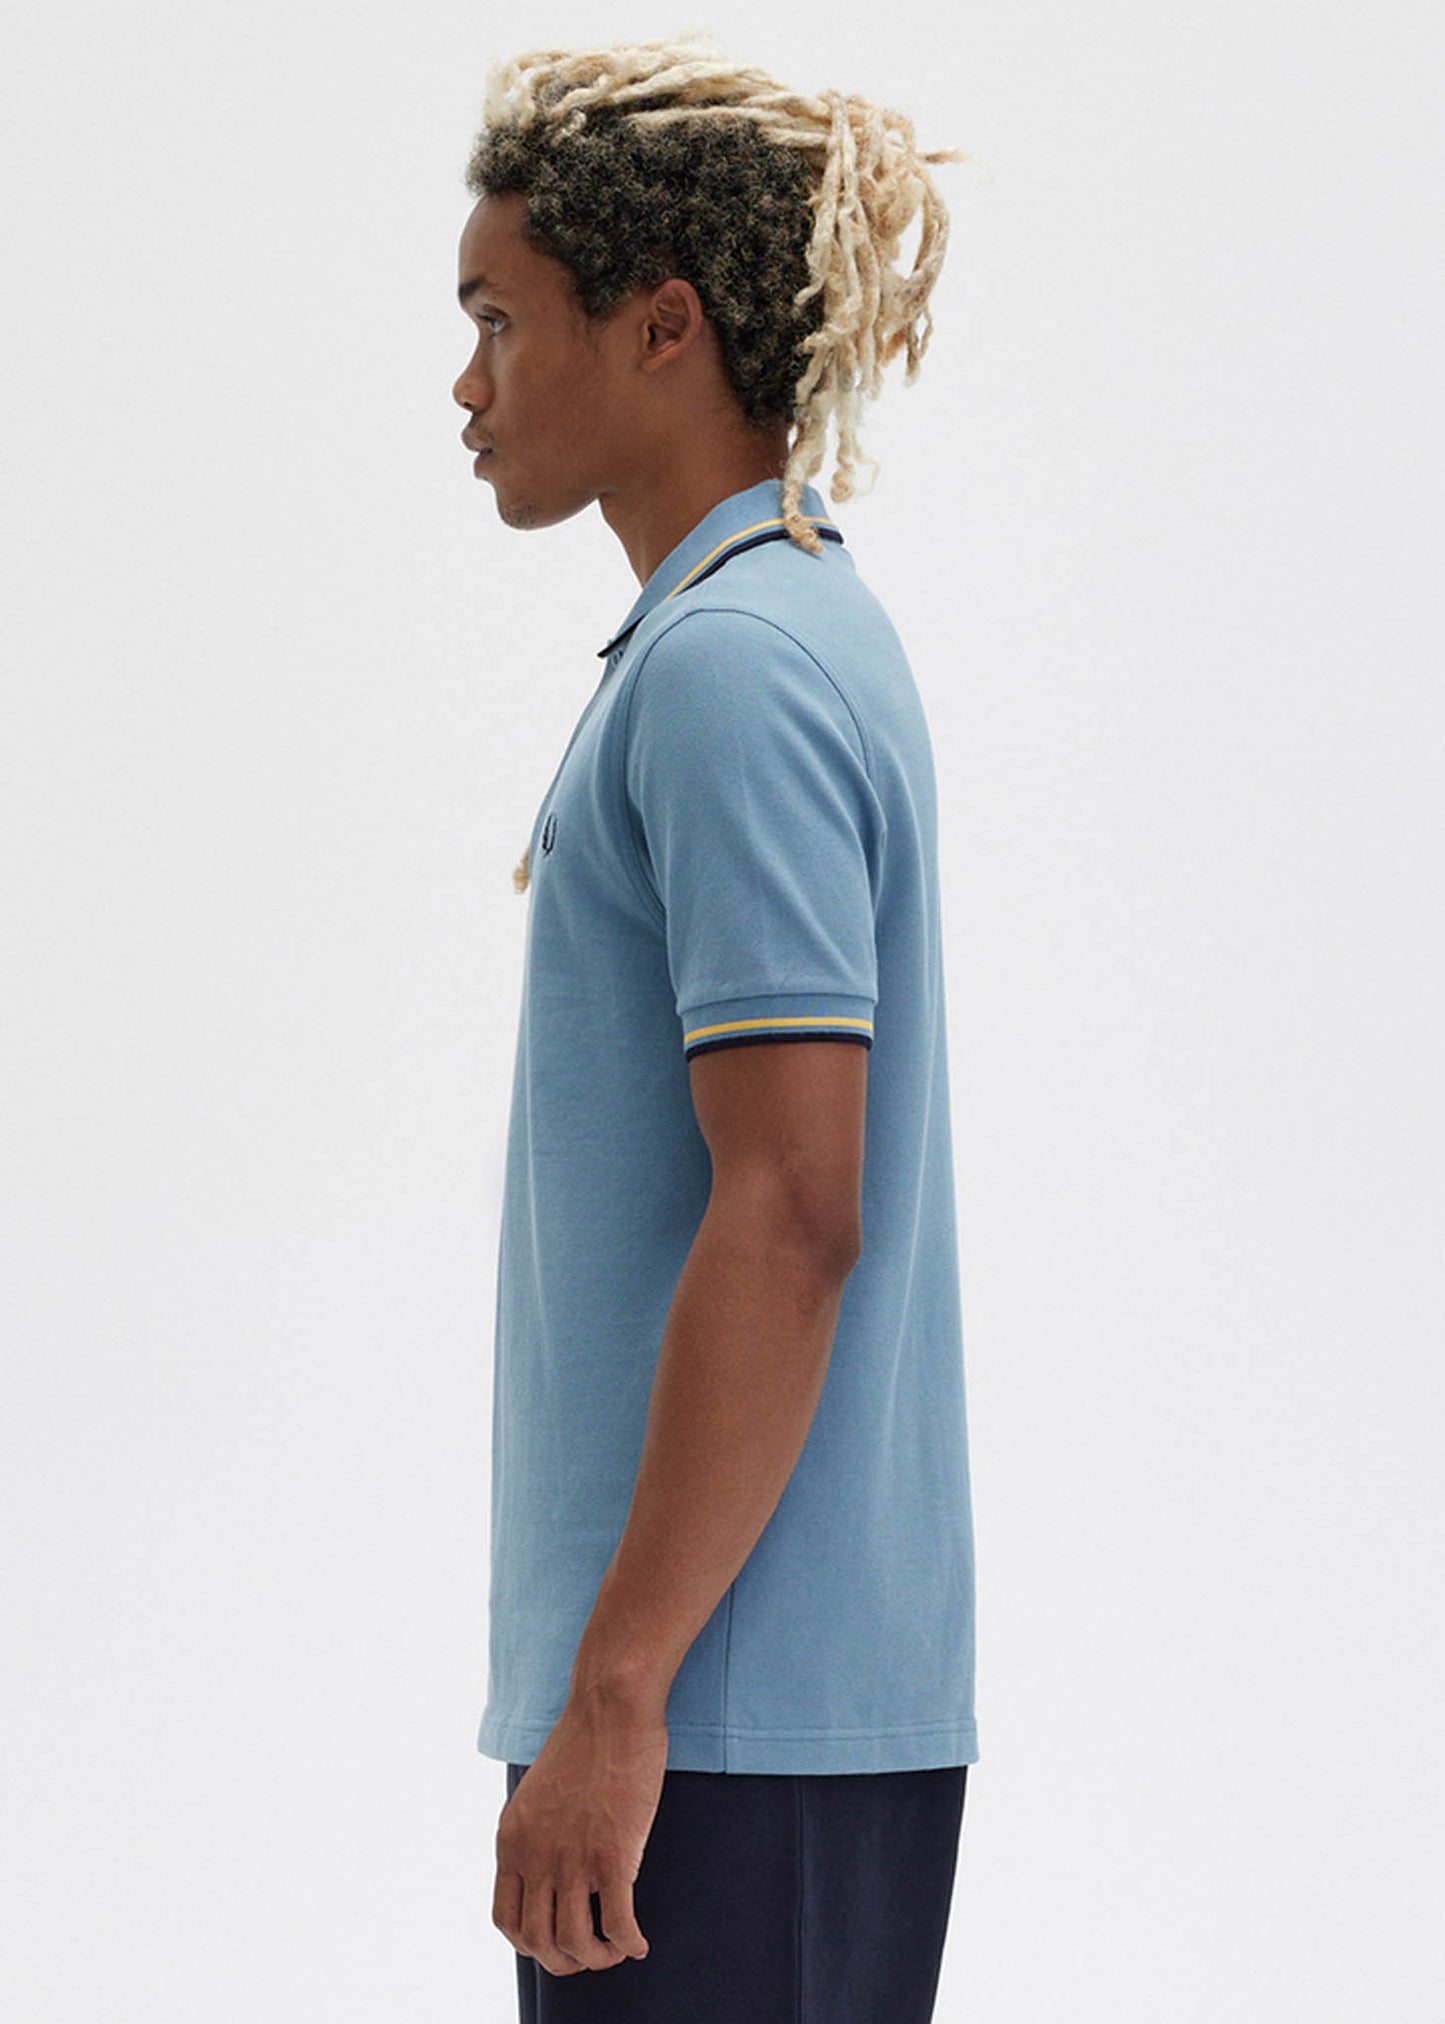 Twin tipped fred perry shirt - ash blue golden hour navy